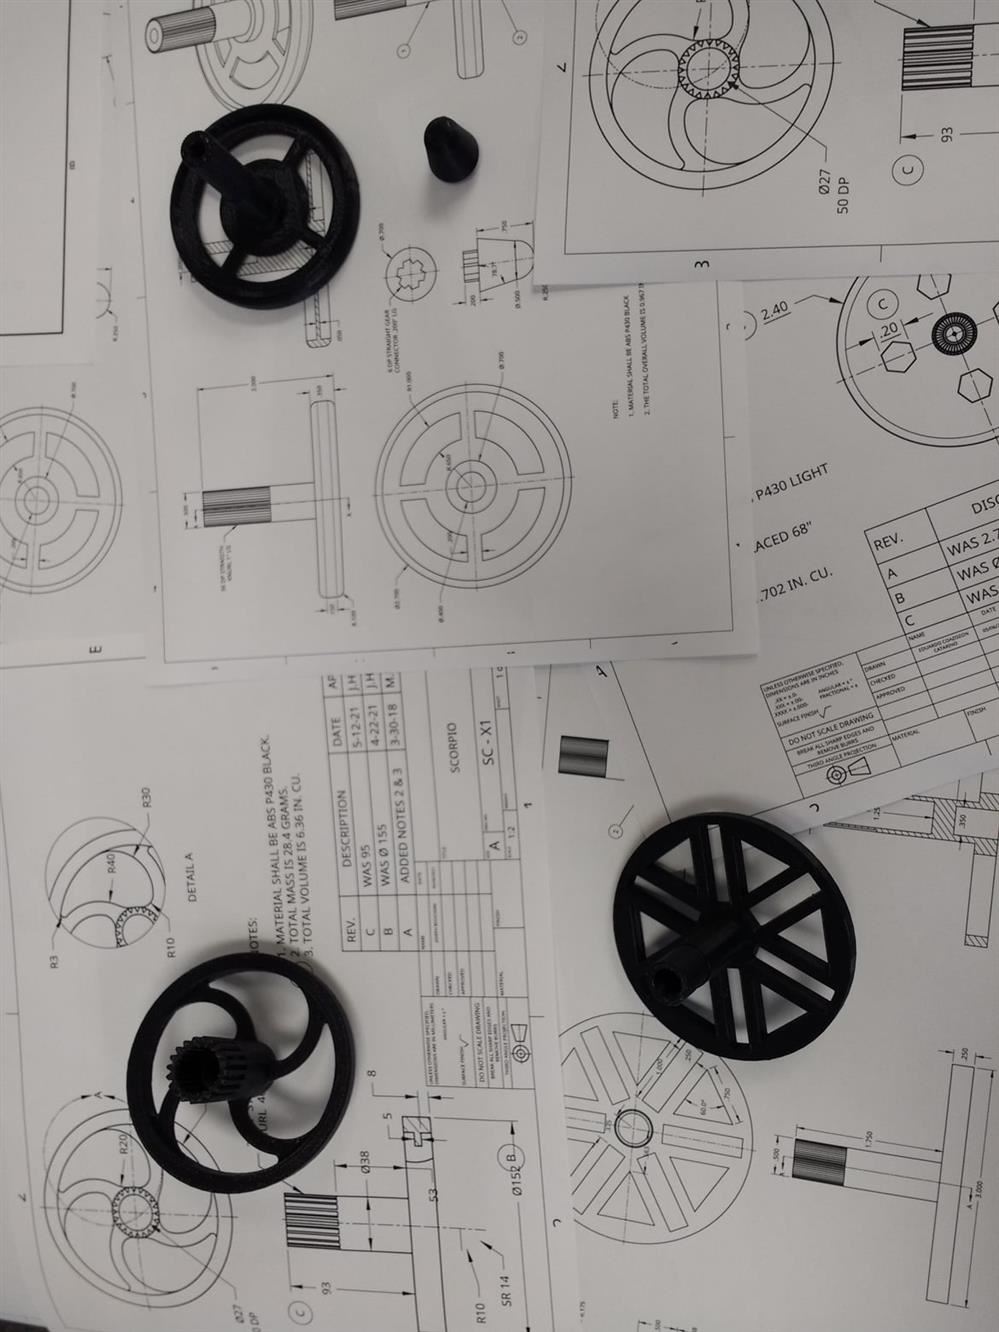 A collection of engineering diagrams, gears, and mechanical components.